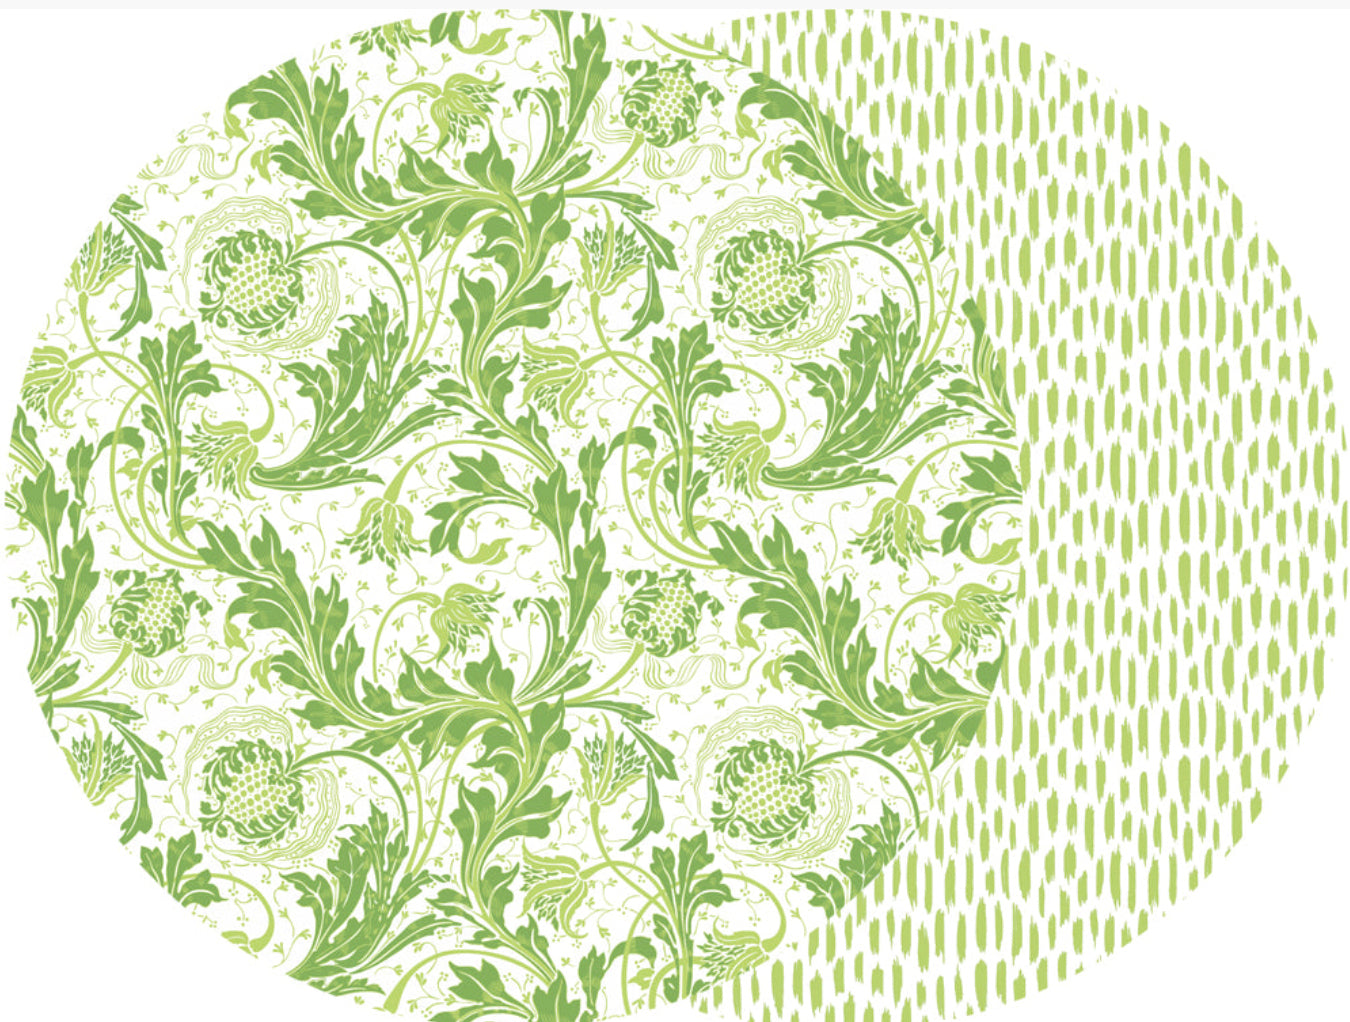 ROUND TWO SIDED POMEGRANATE AND JAIPUR PLACEMAT ~ LIME